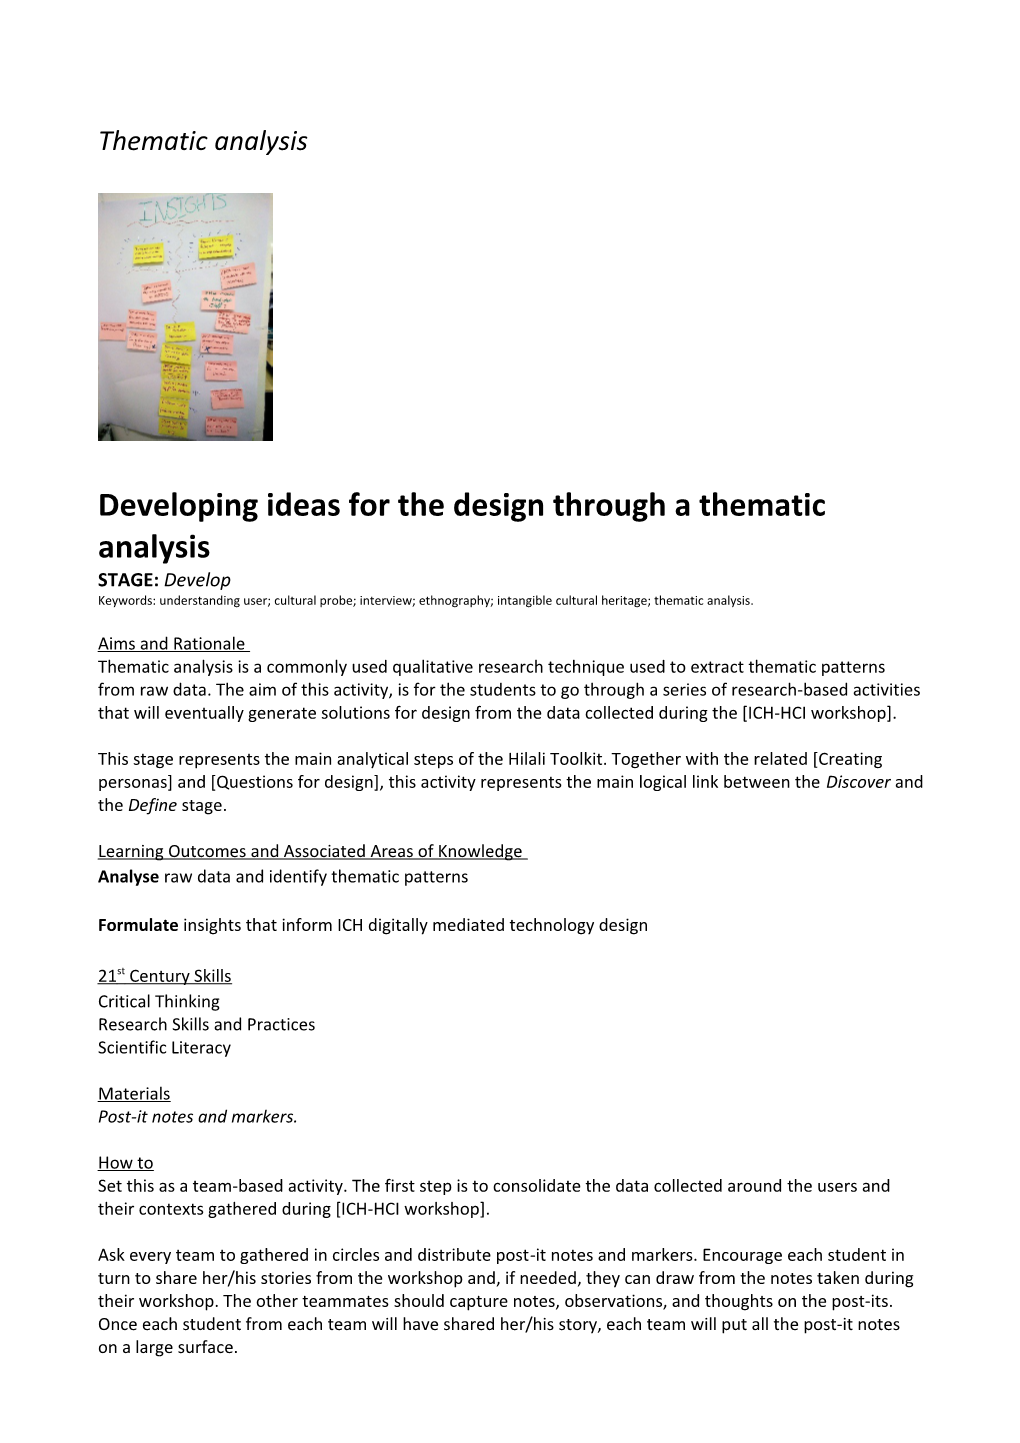 Developing Ideas for the Design Through a Thematic Analysis